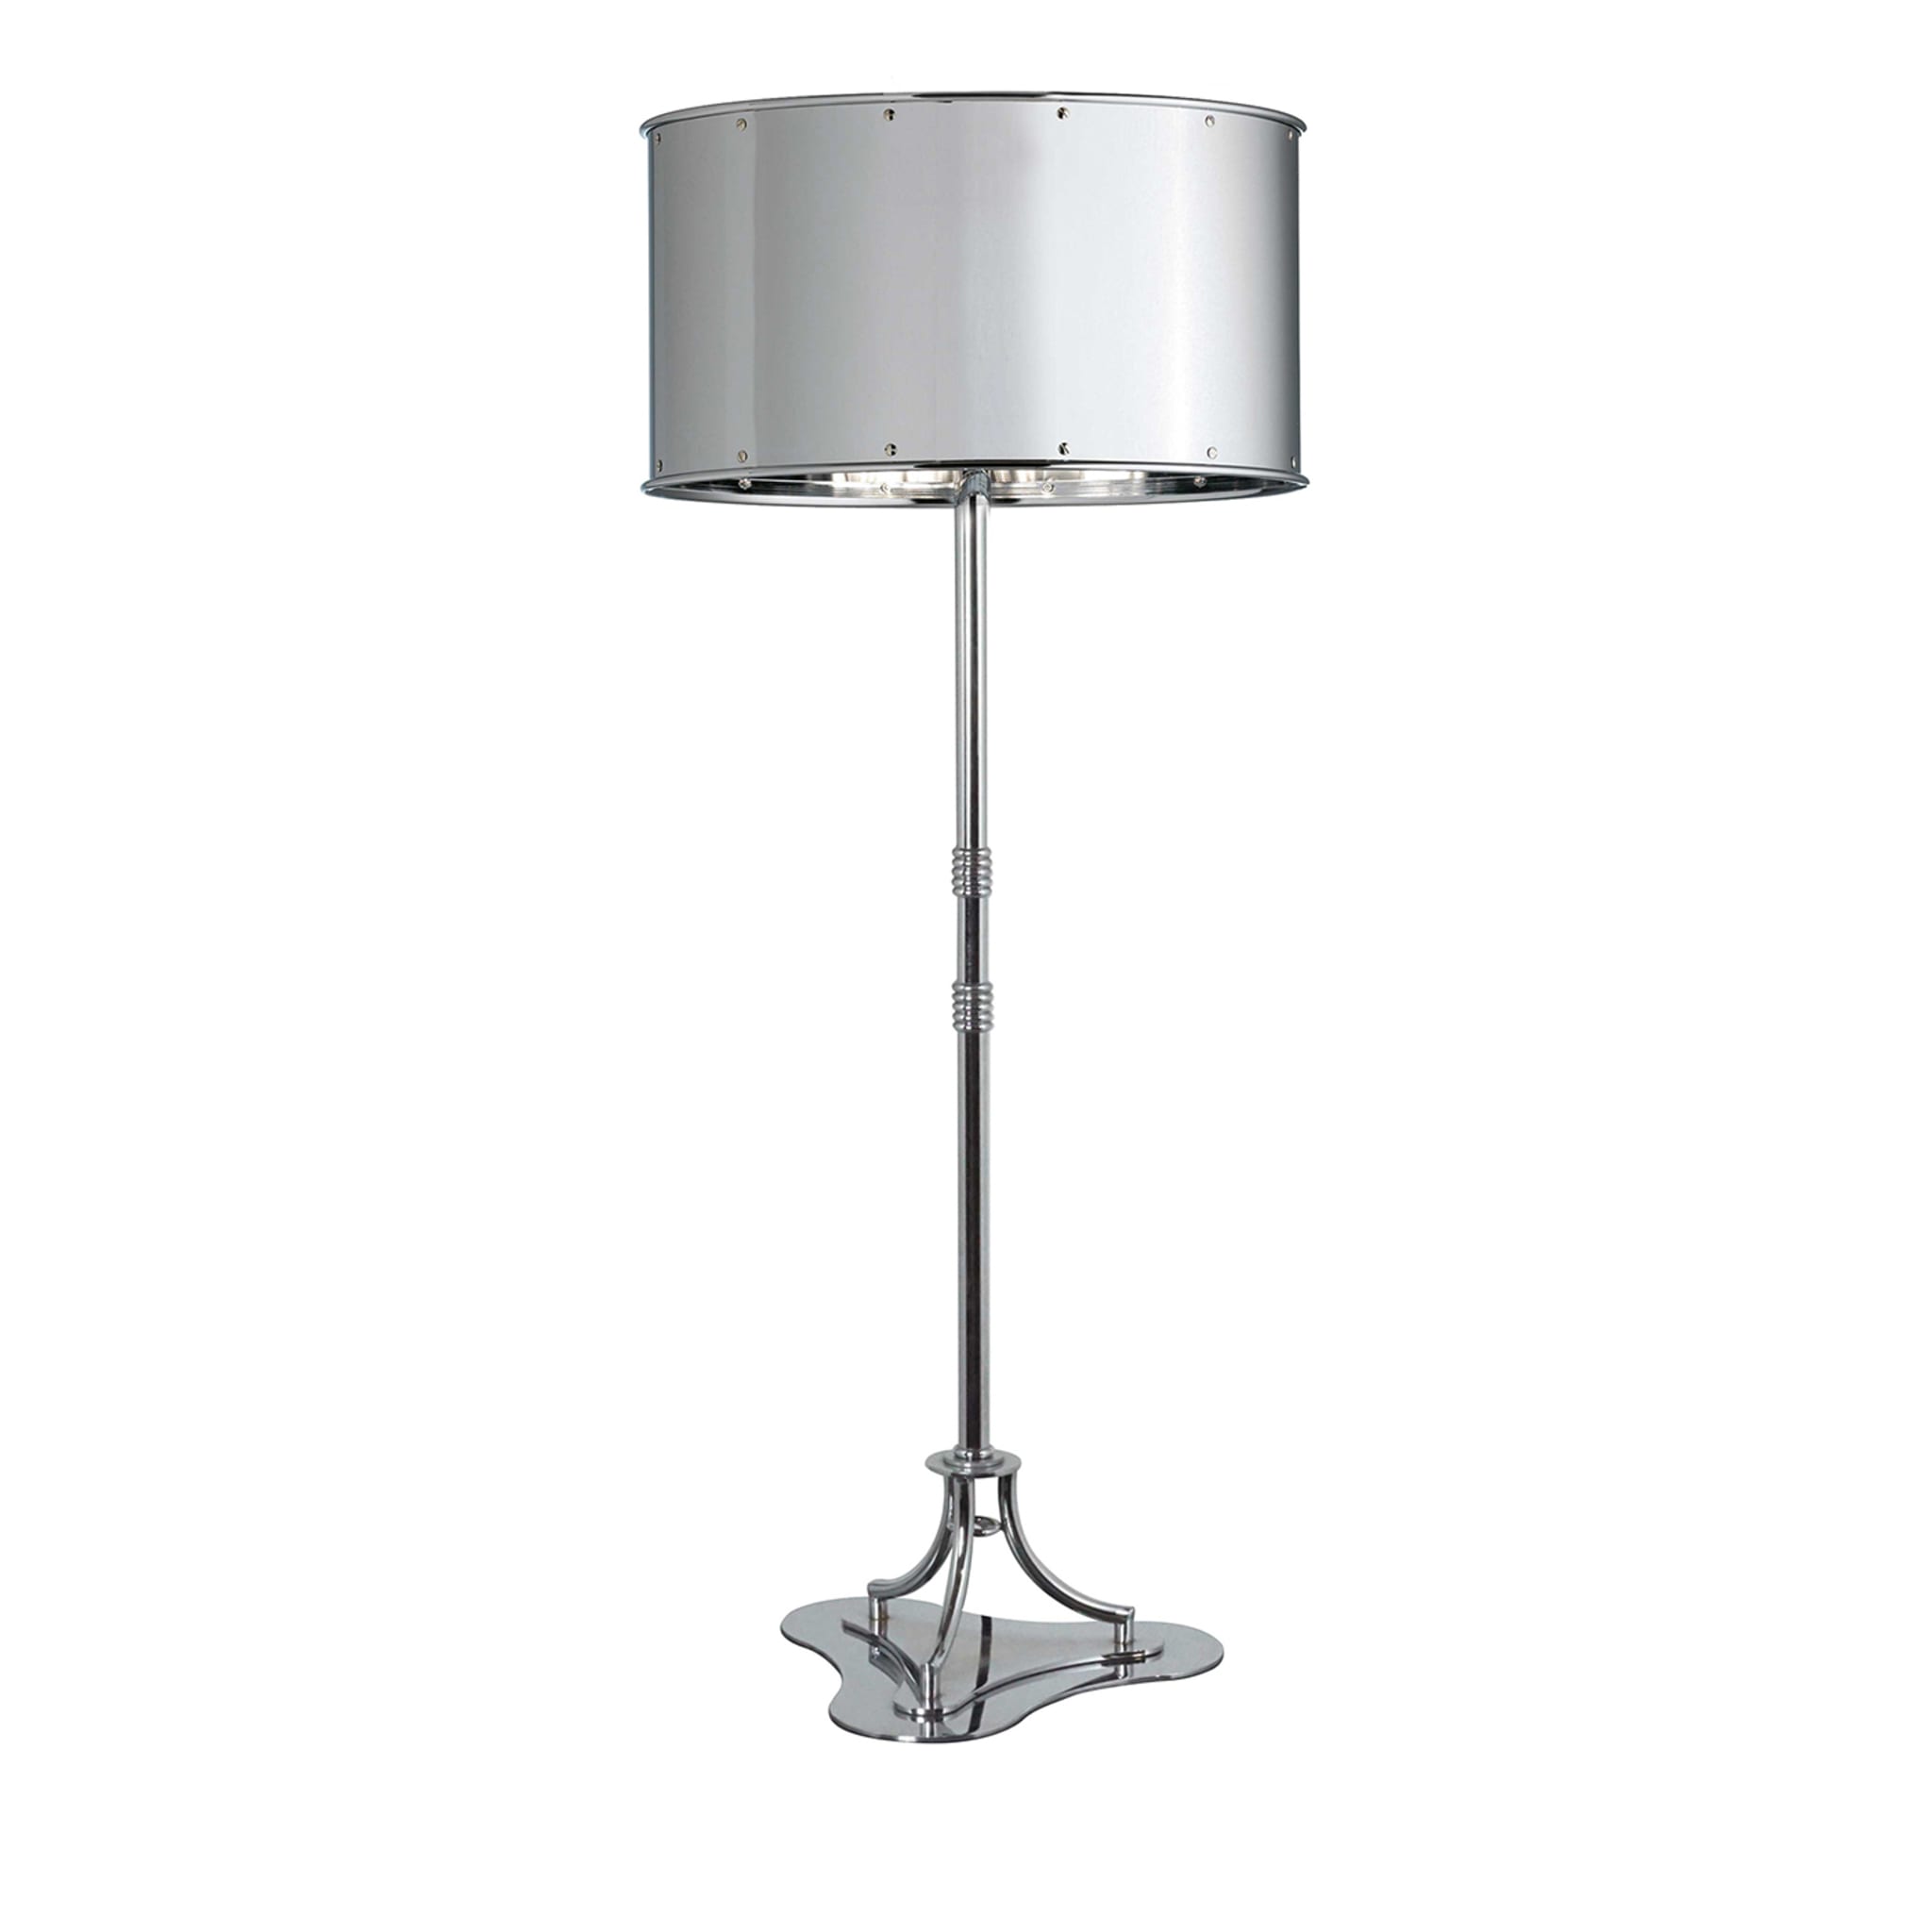 Zelda M251 Table Lamp by Stefano Tabarin - Main view